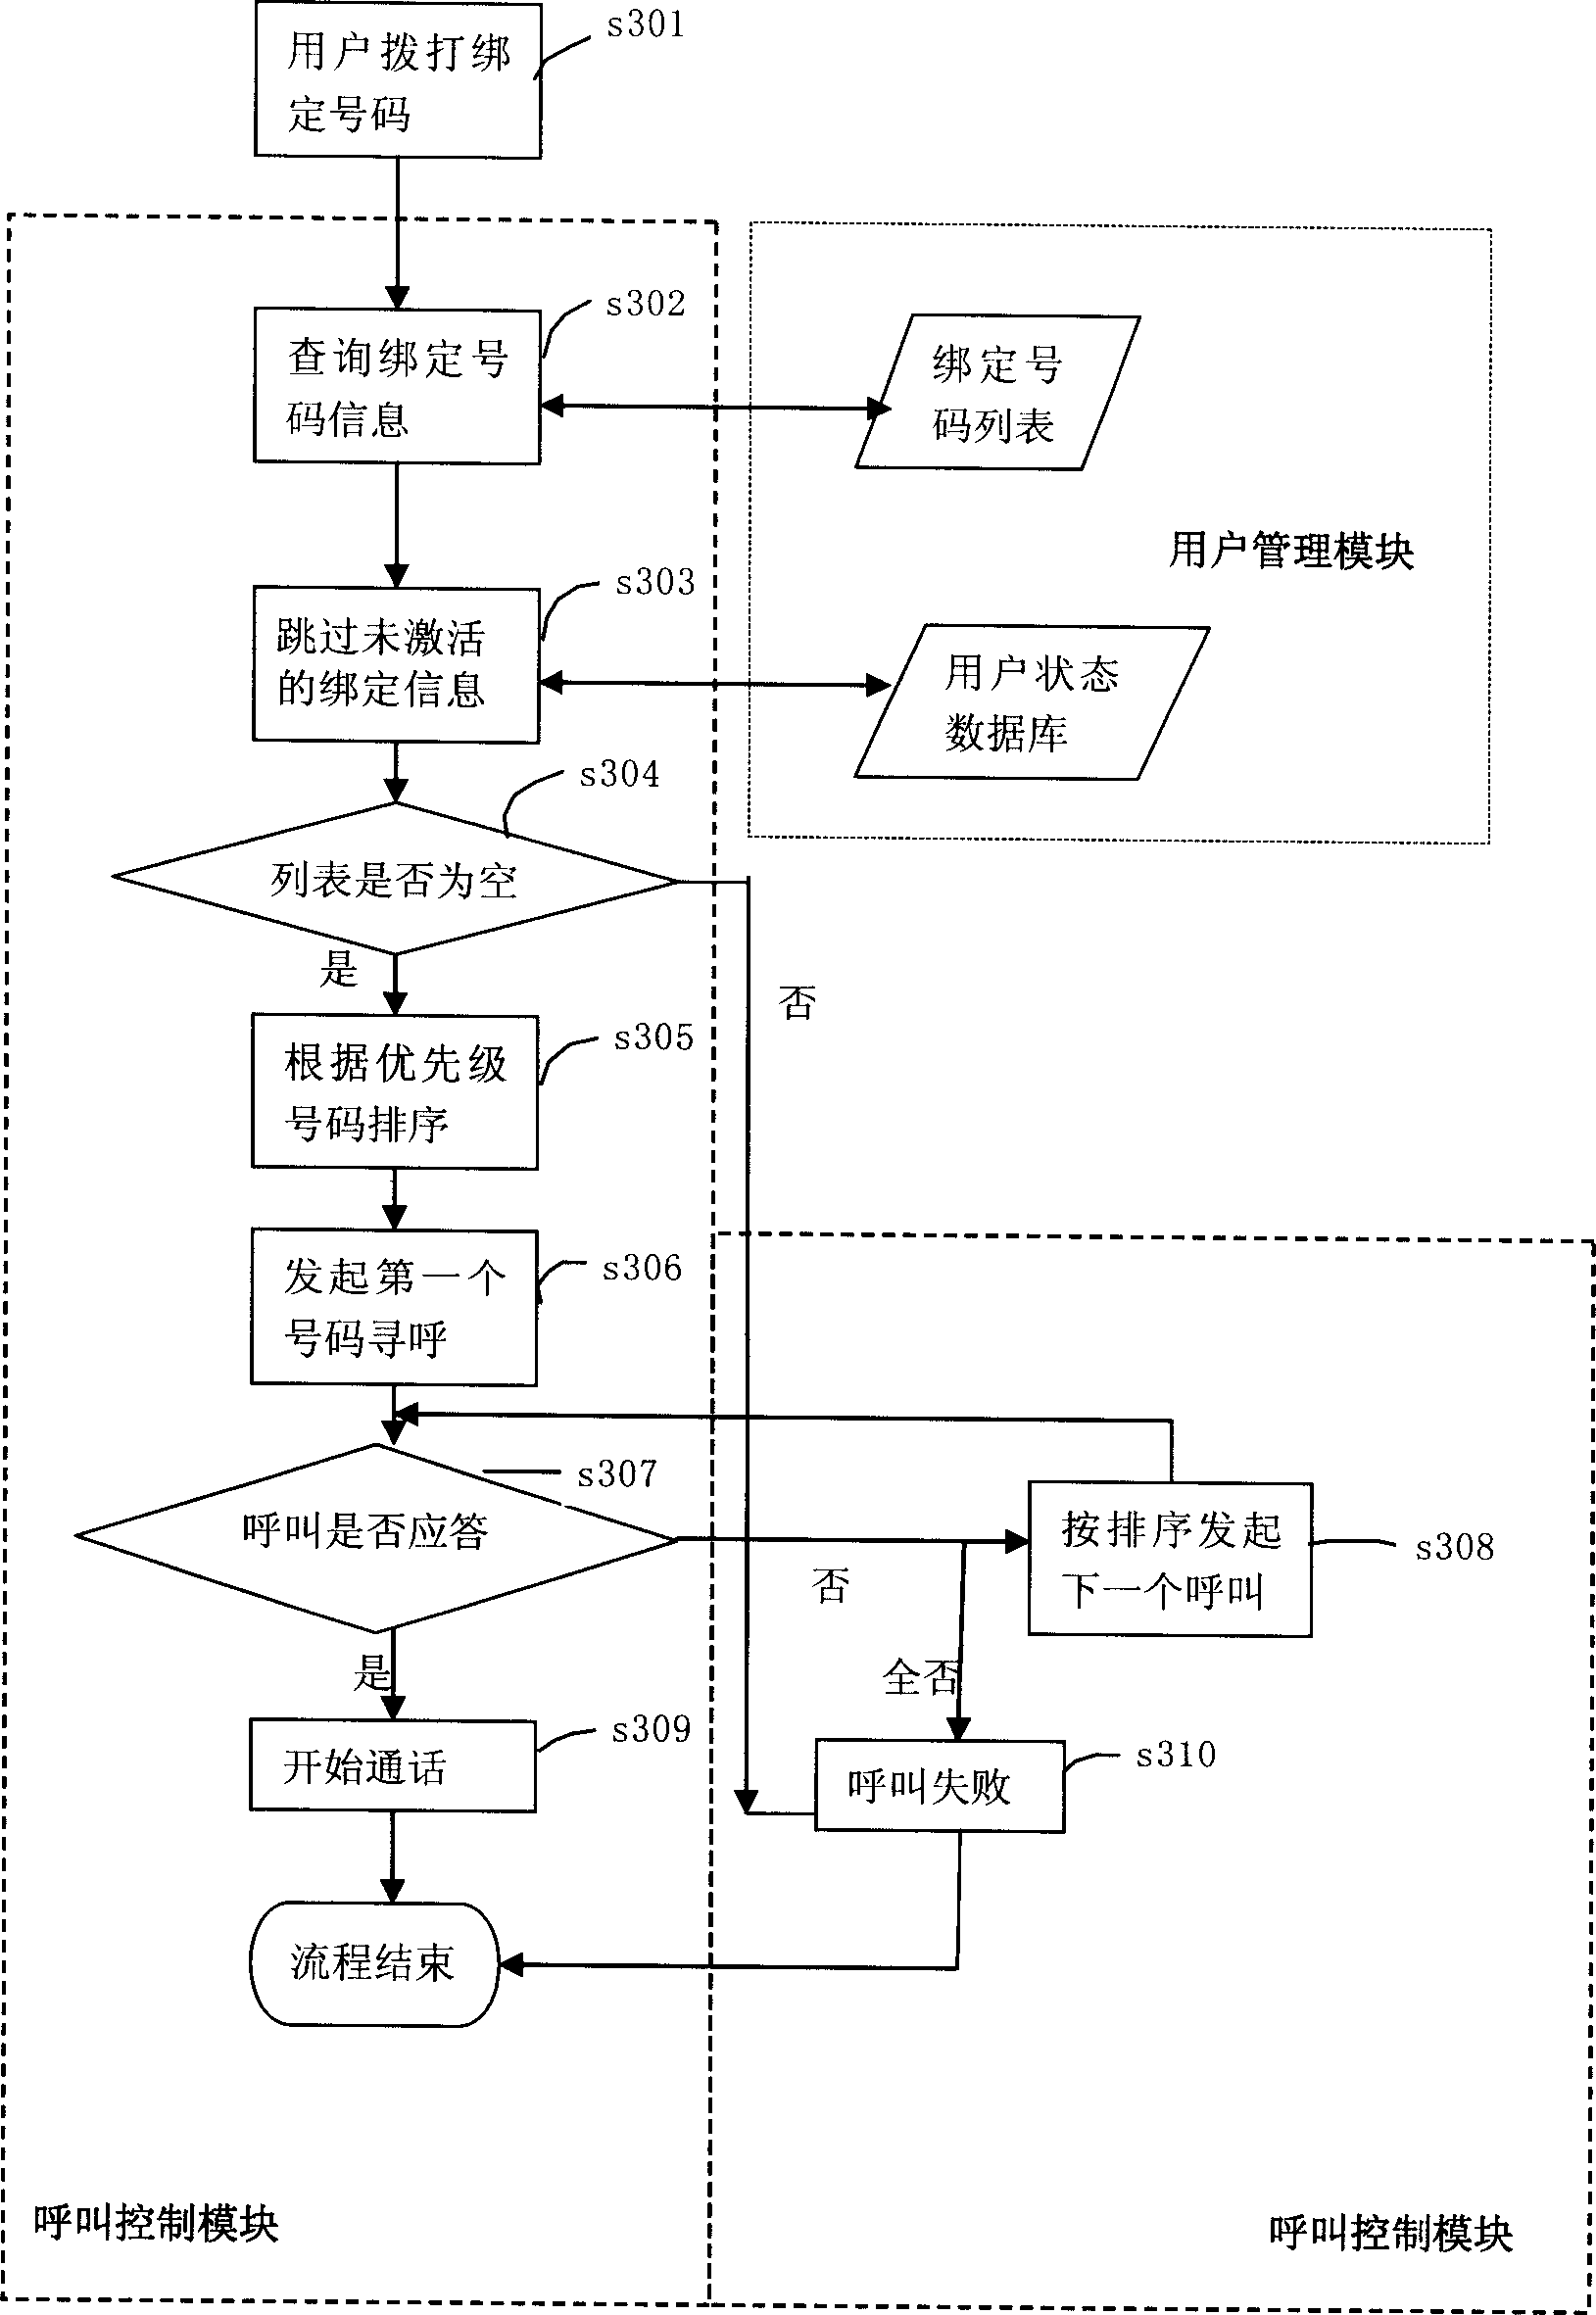 Number binding method and method for calling thereby